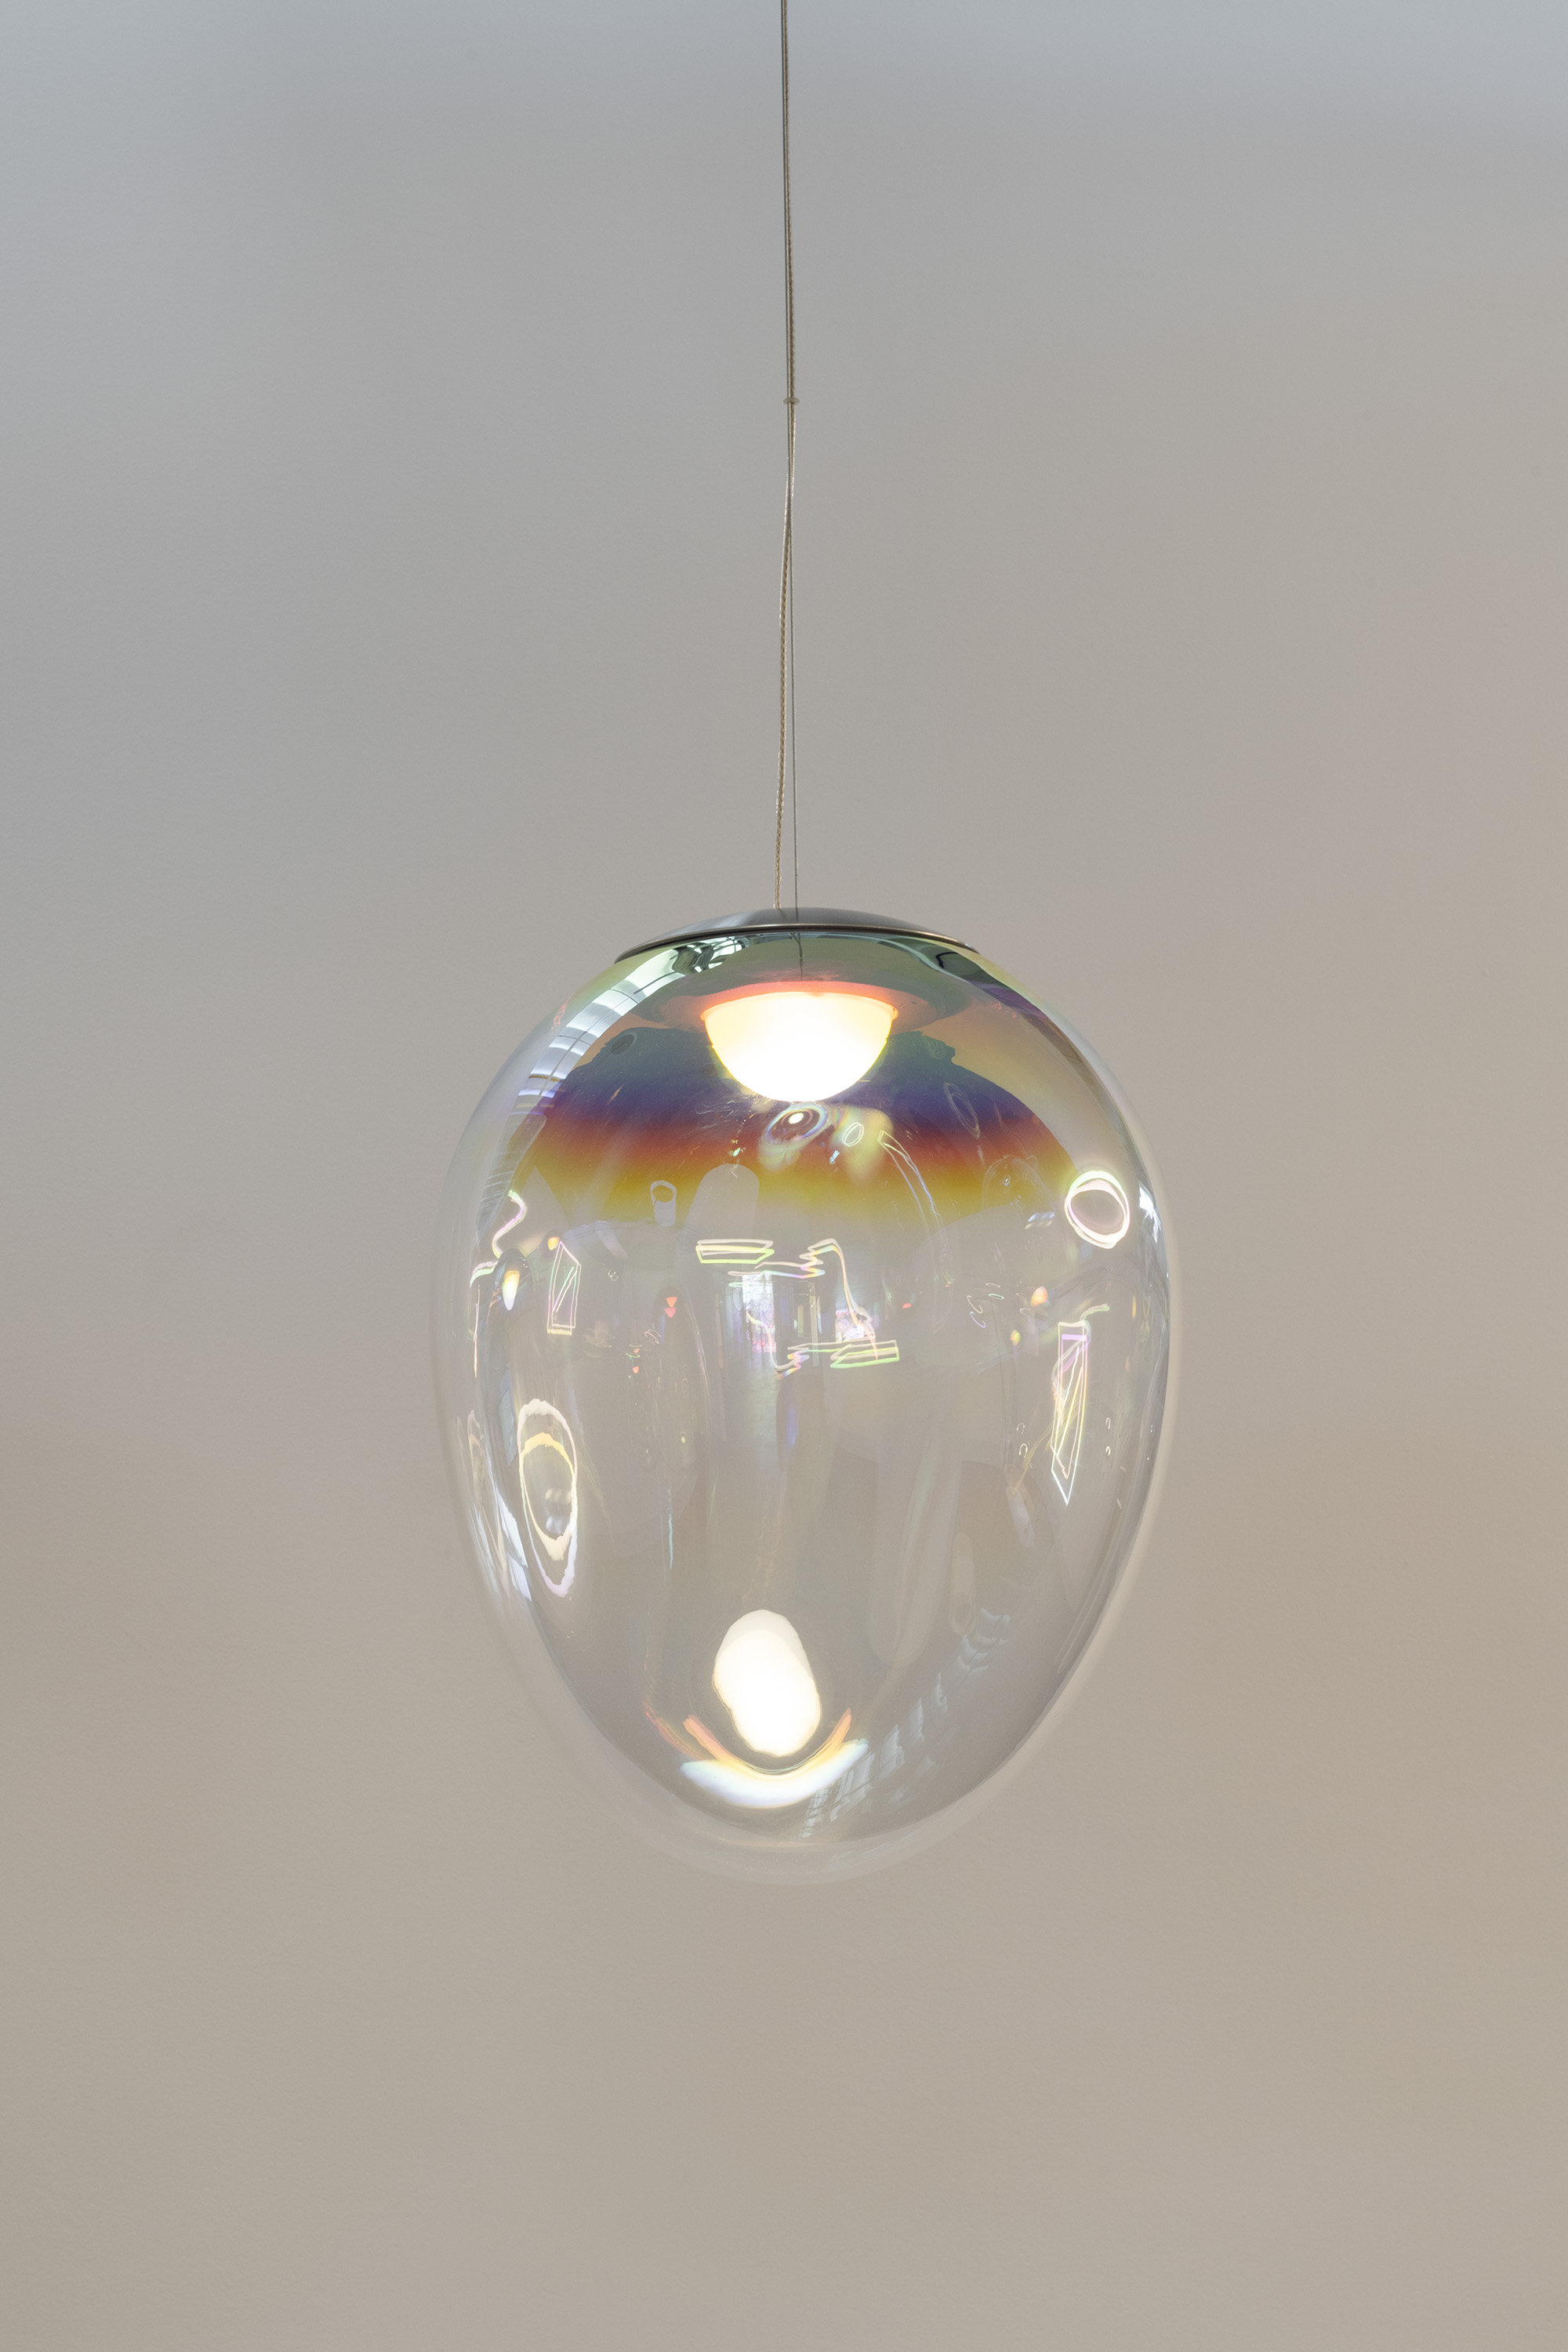 08714681094426 - Sphere-shaped incandescent lamp - Lamps - e-Bailey